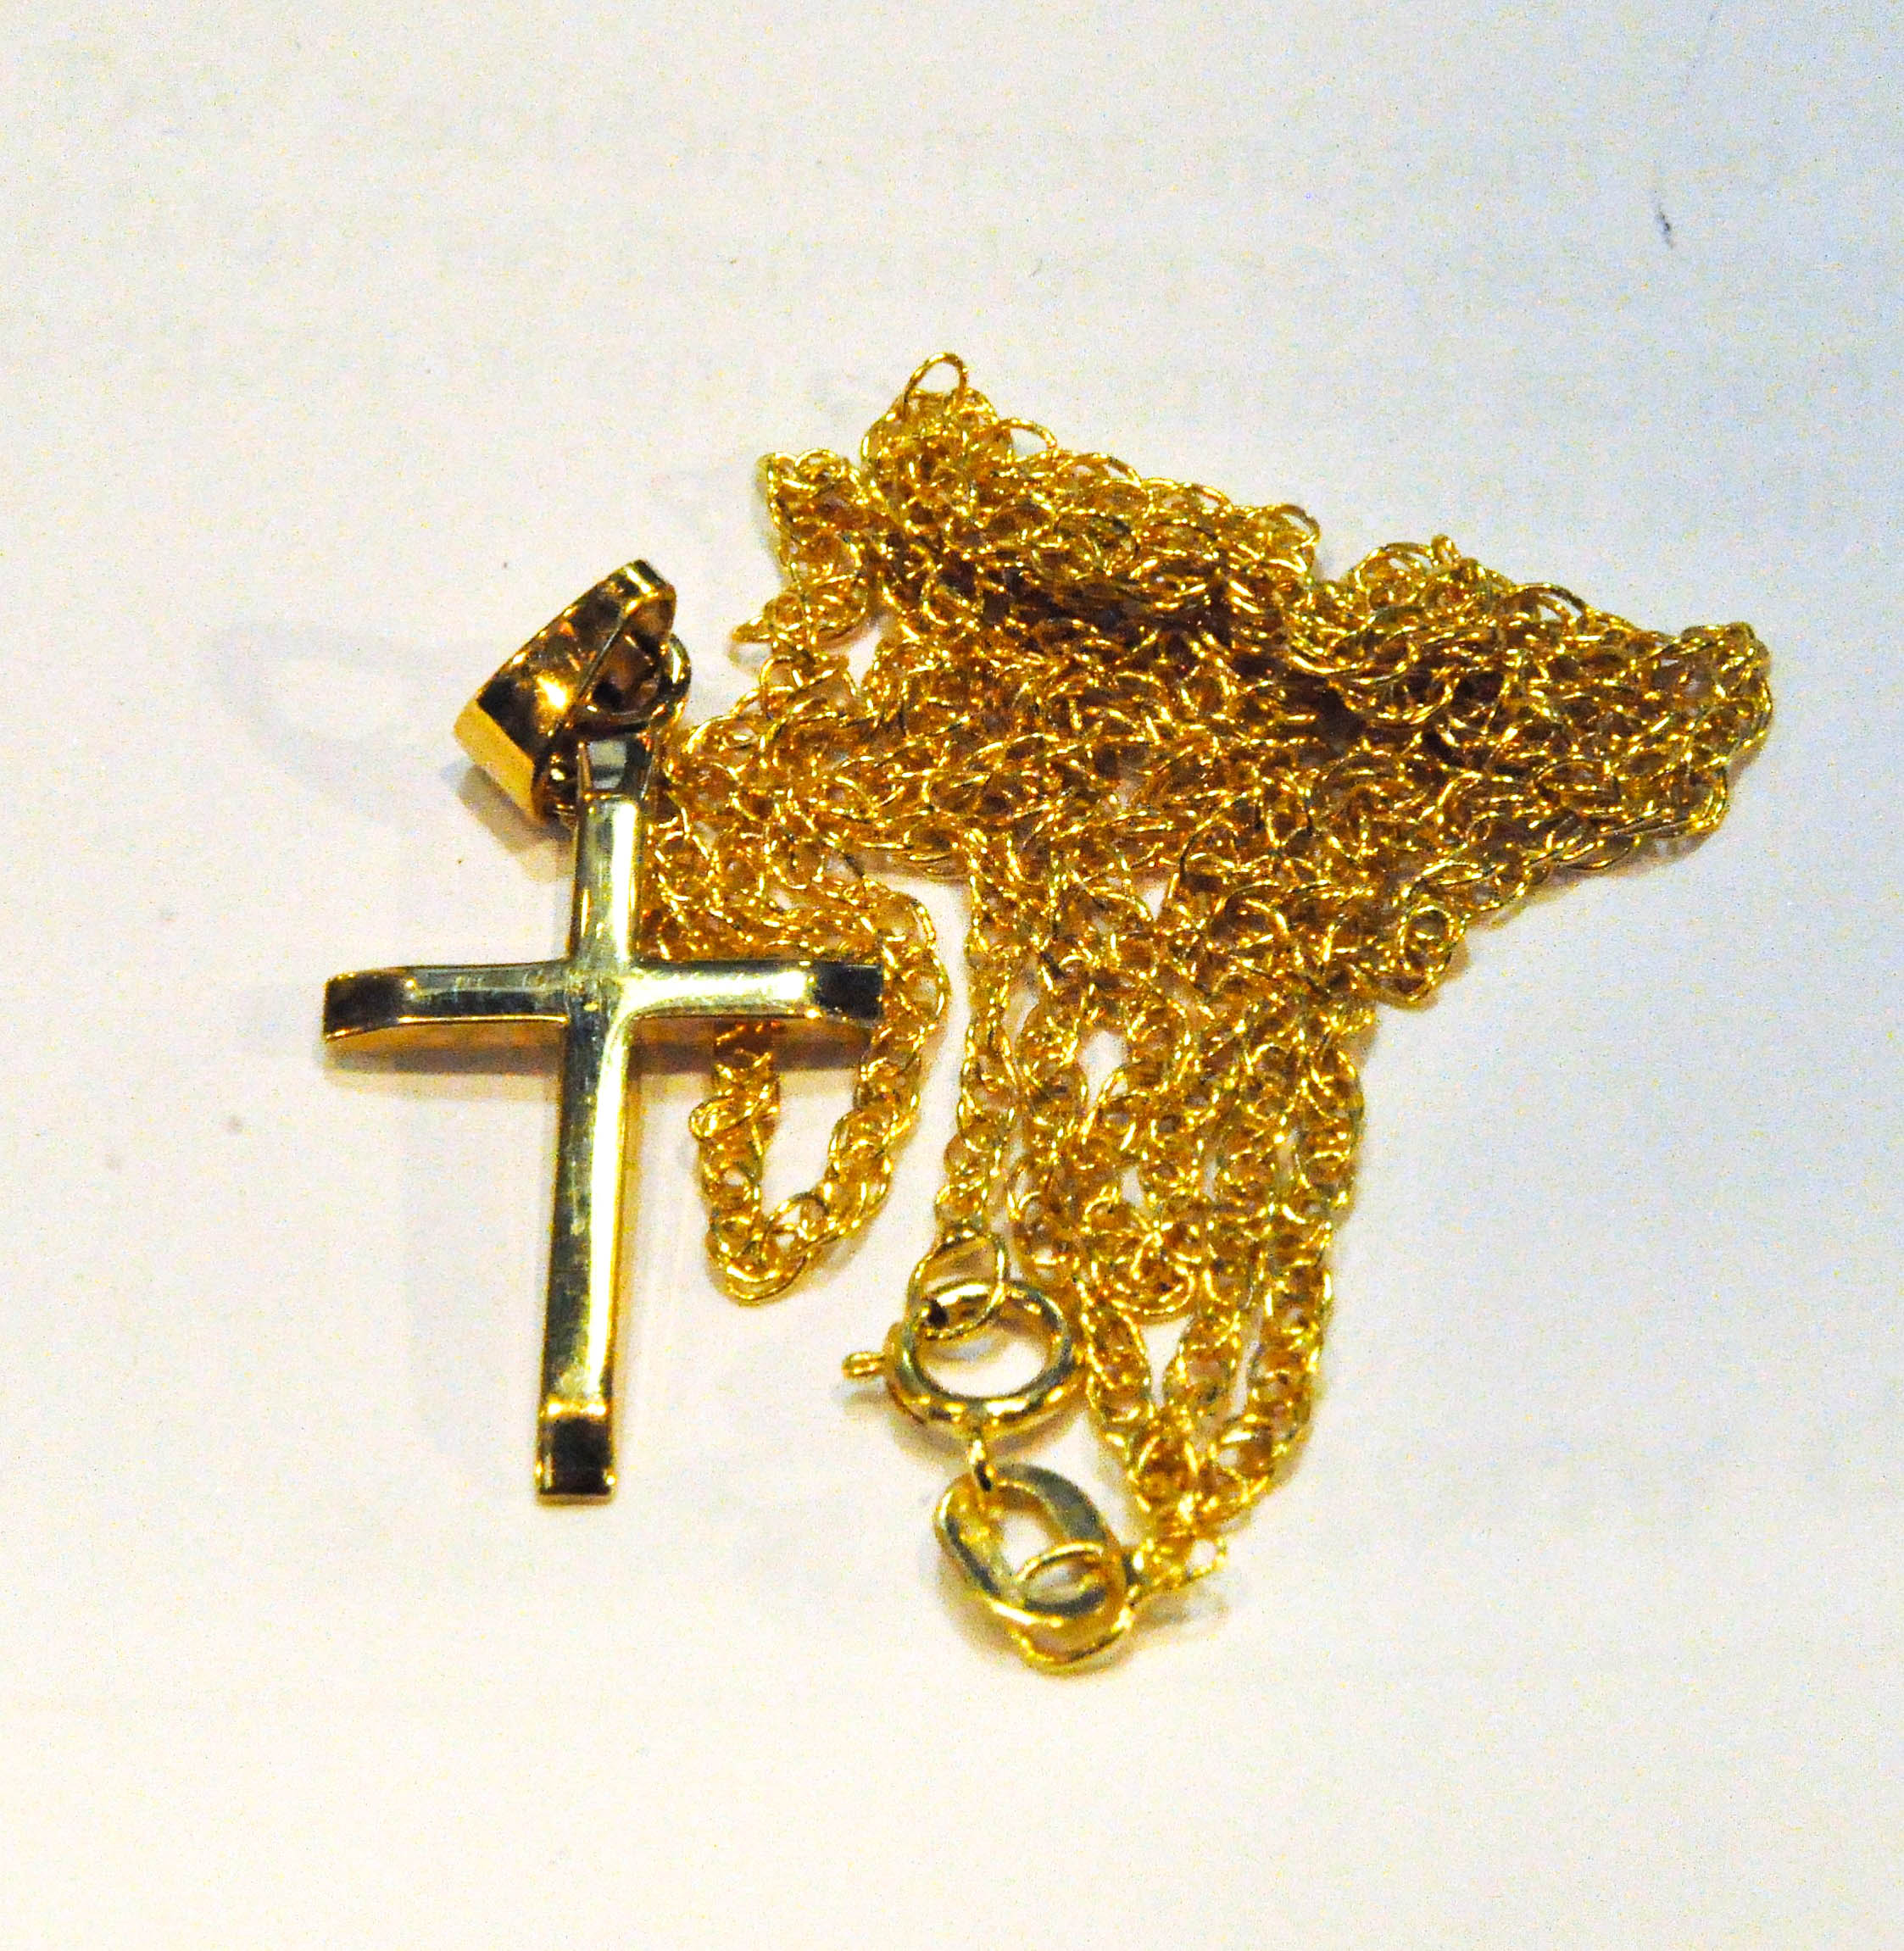 Two 9ct gold fine neck chains, one set with a 9ct gold cross and other items - Image 2 of 2